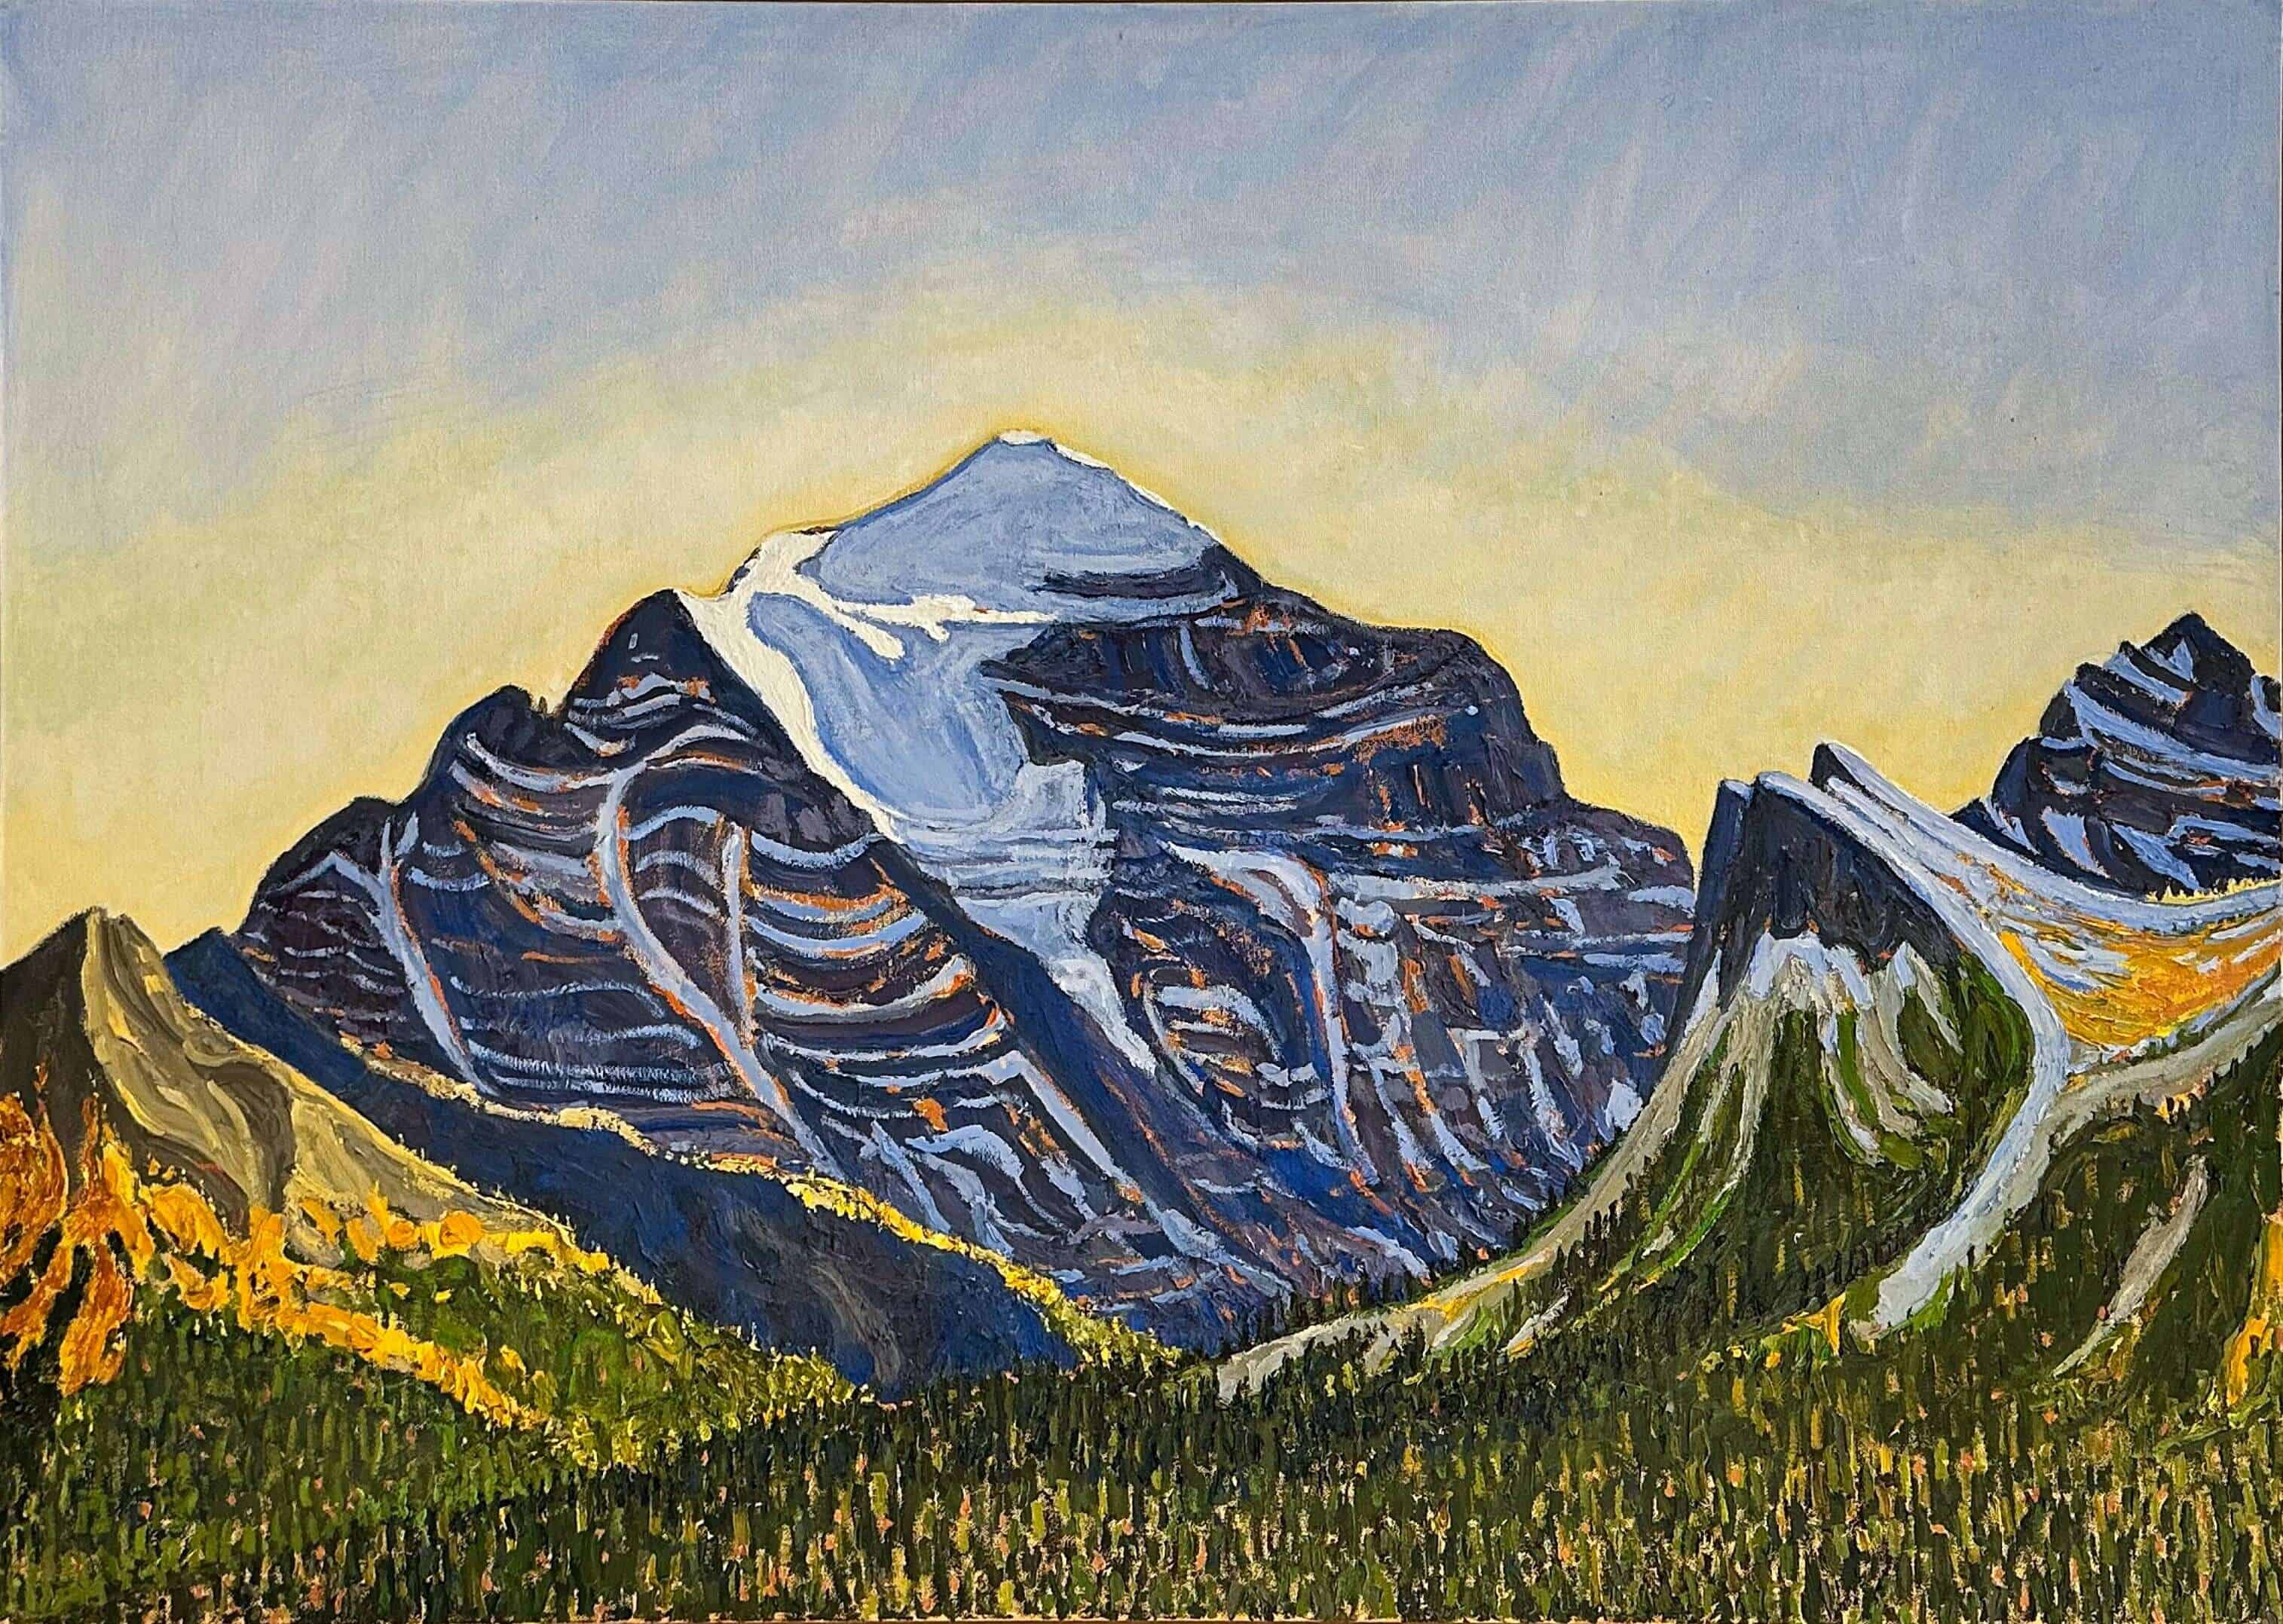 Contemporary Landscape Art. Title: Mt. Temple, Oil on Canvas, 30 x 42 in by Canadian Artist Dennis Brown.